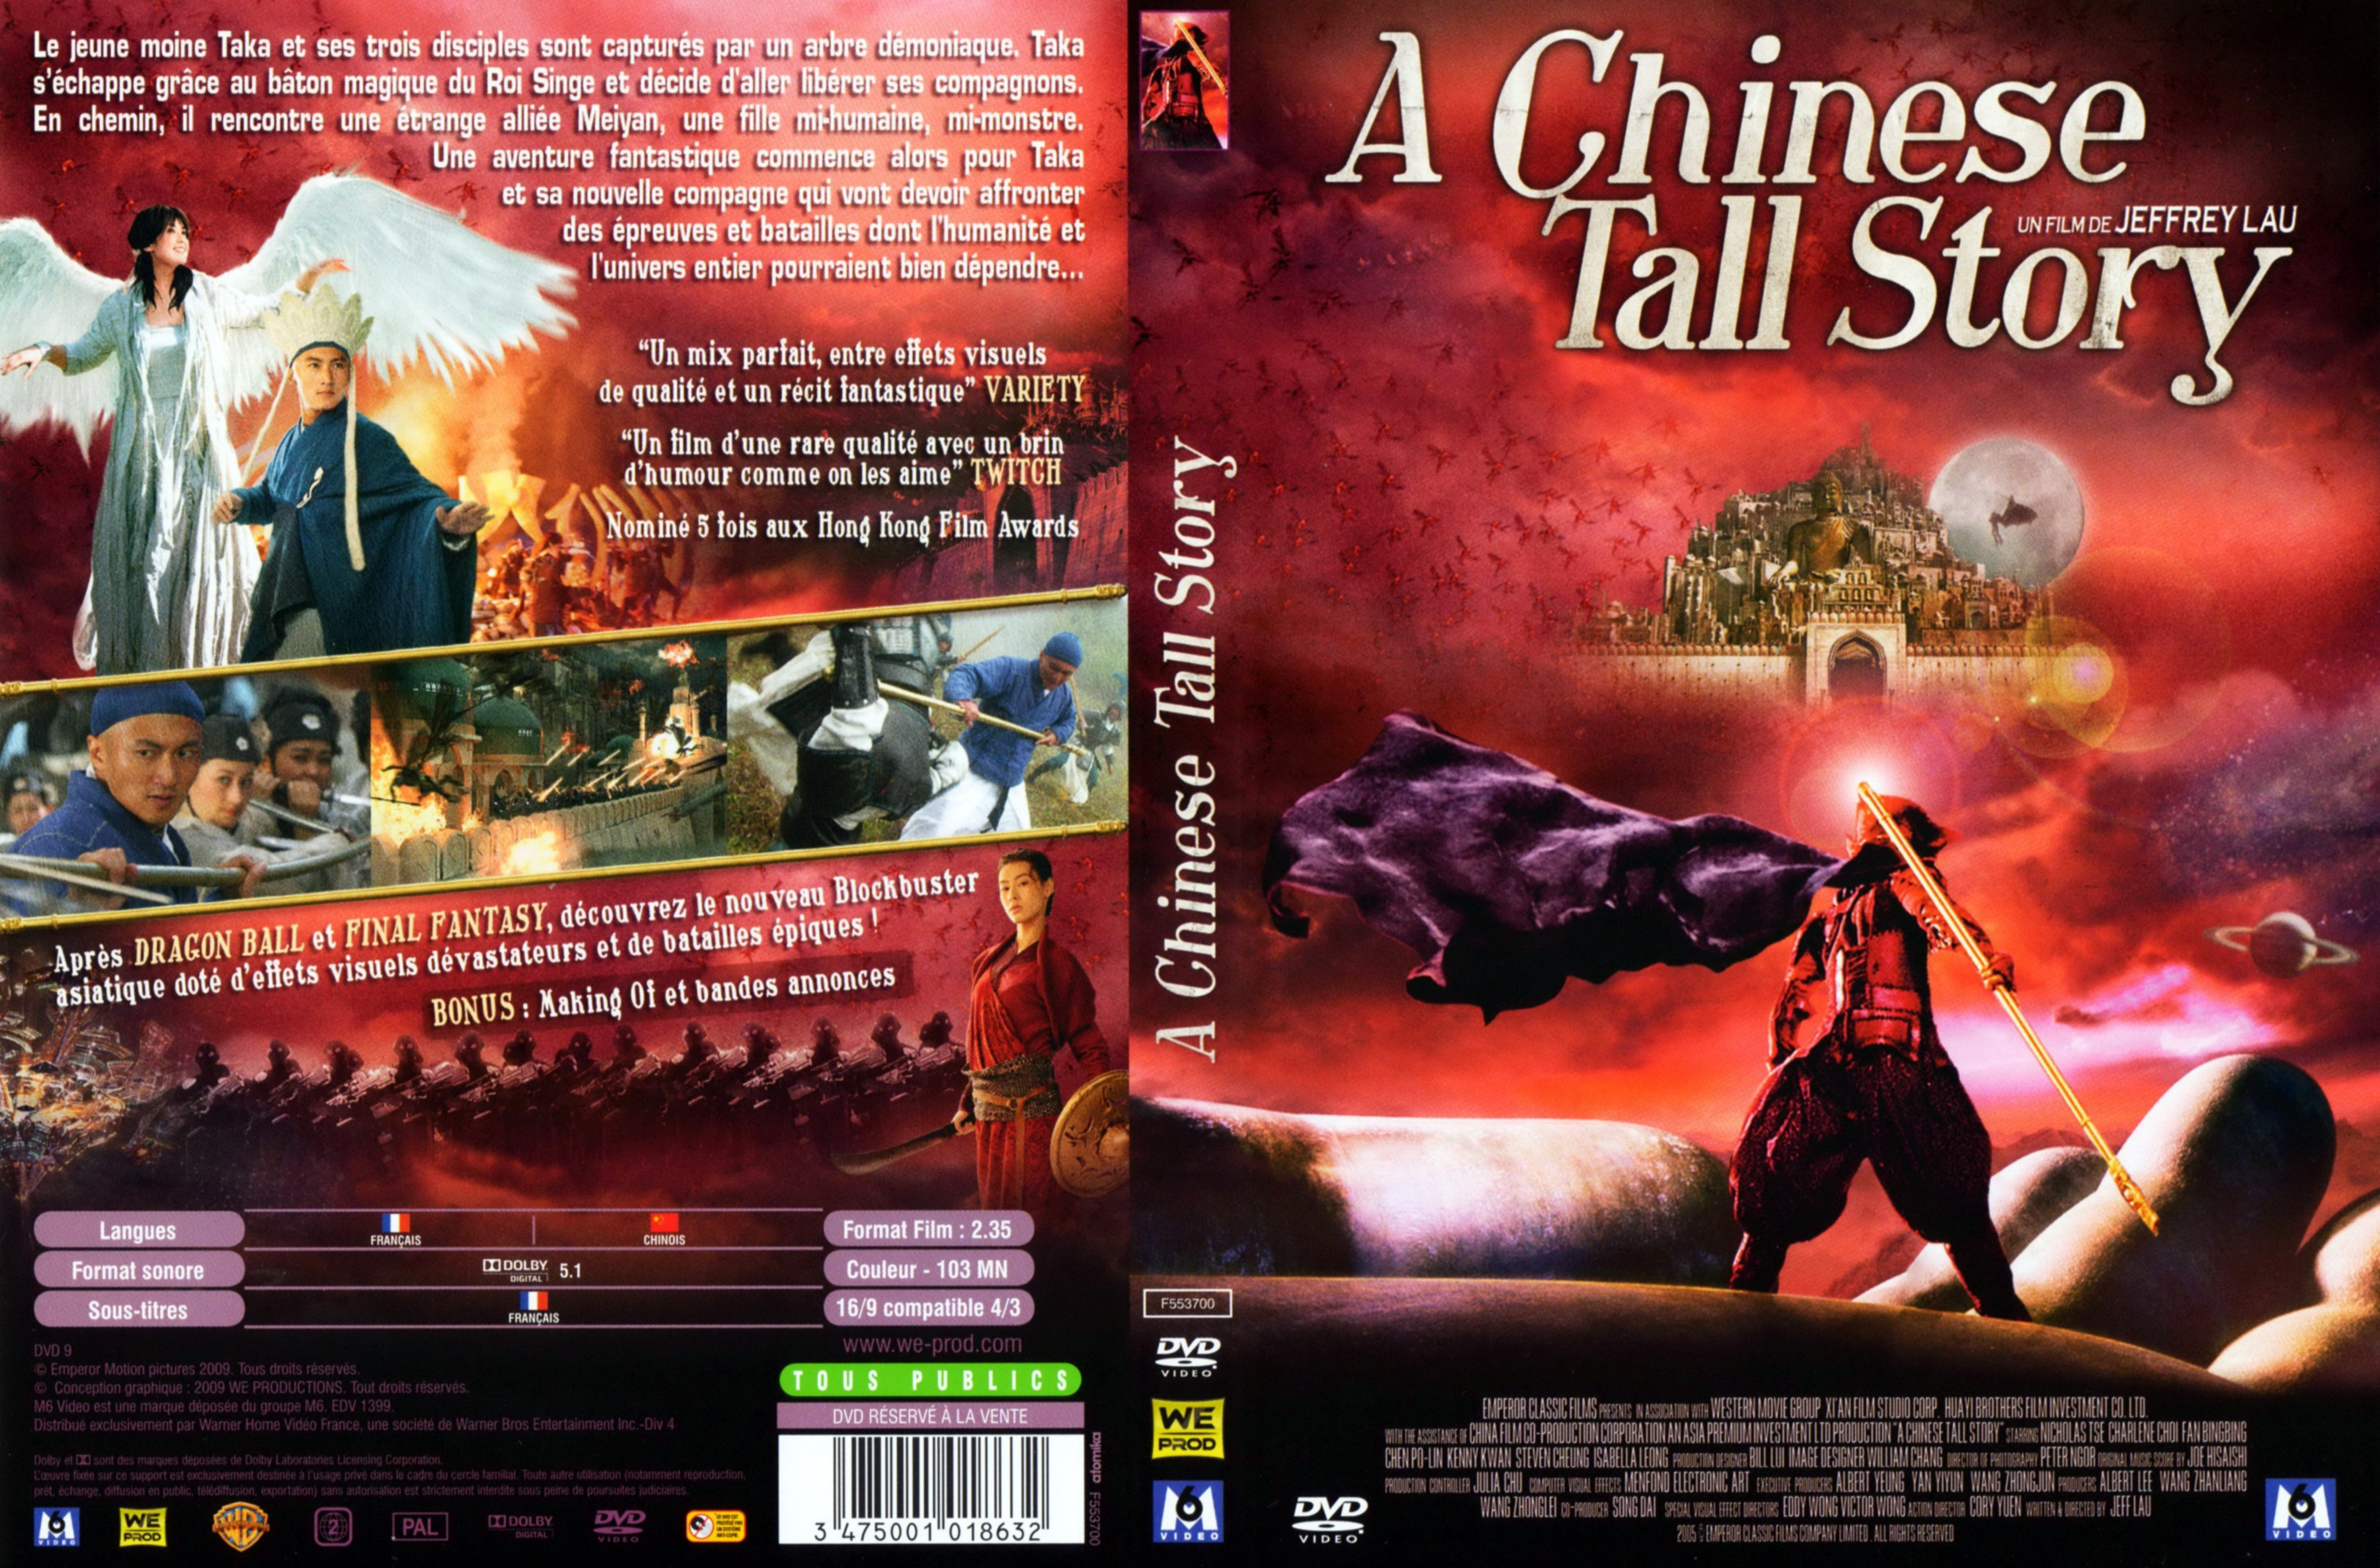 Jaquette DVD A chinese tall story